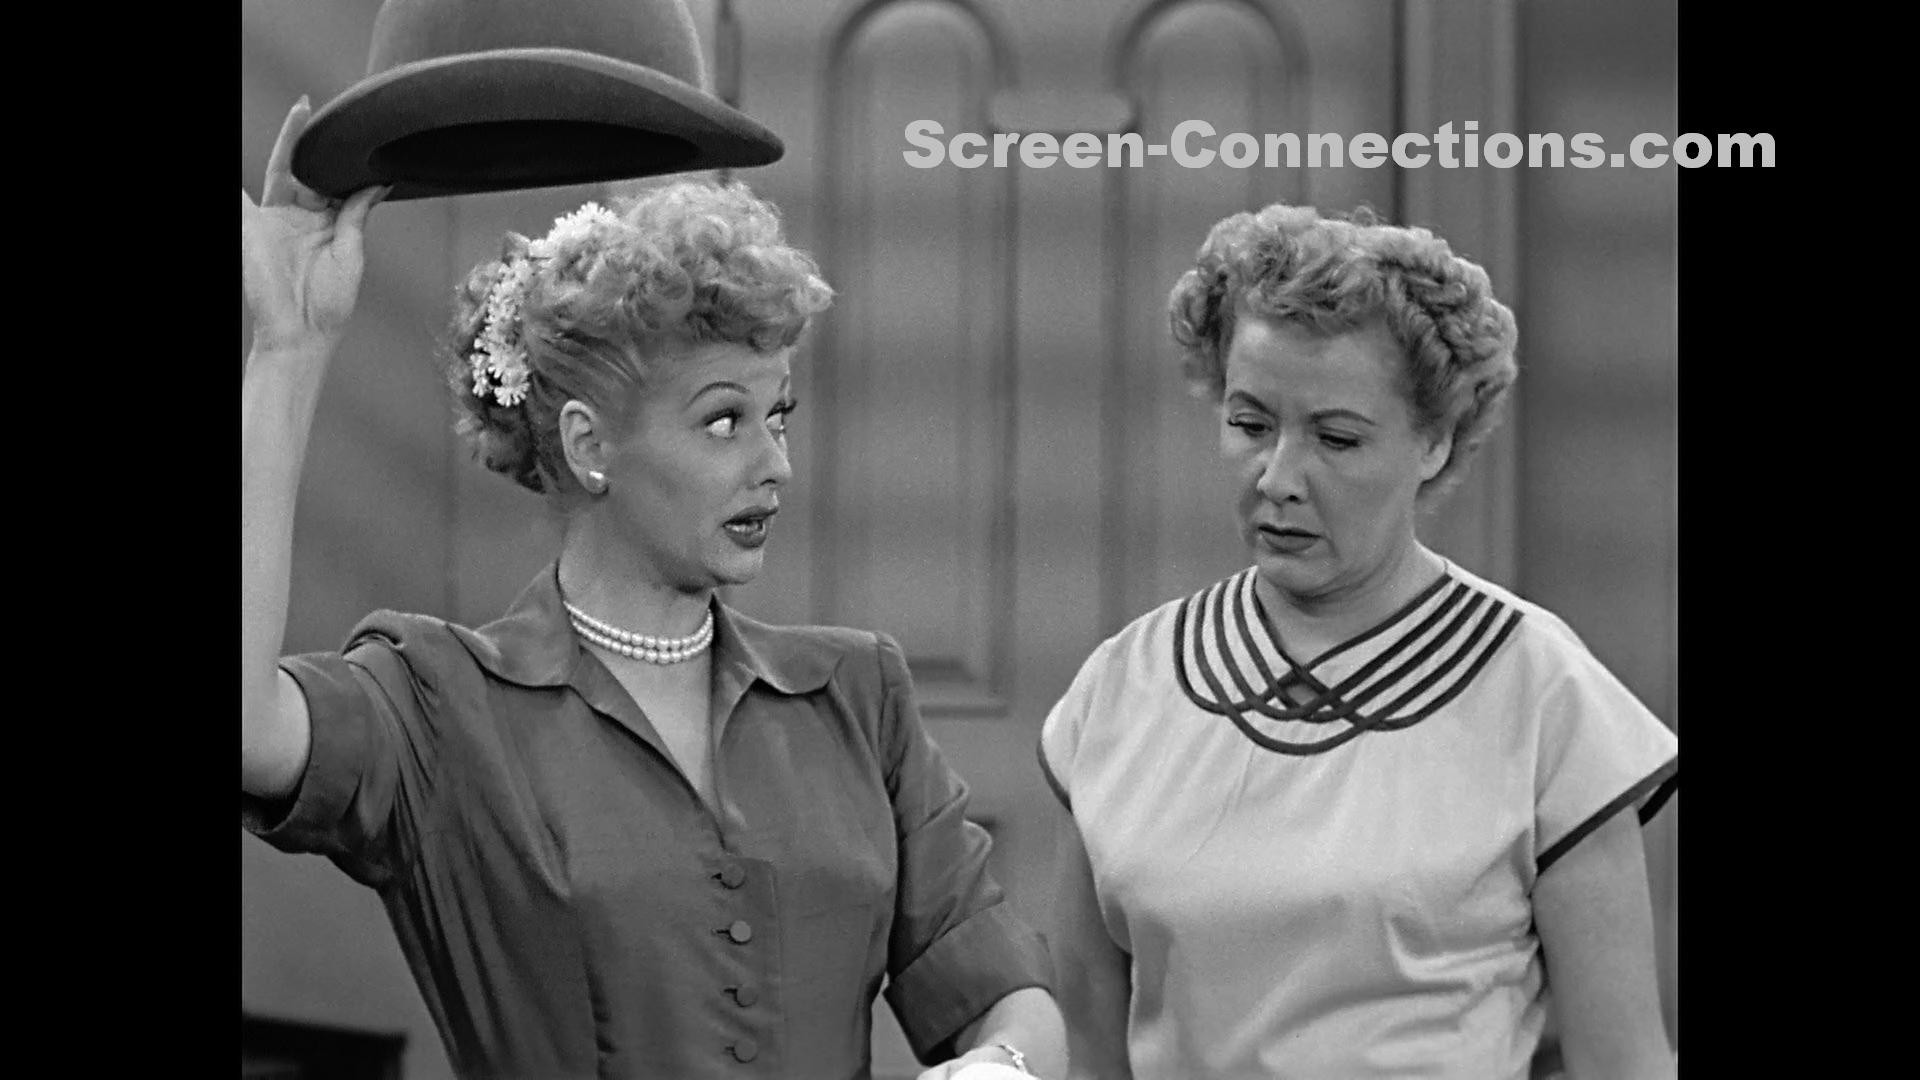 1920x1080 [Blu-Ray Review] 'I Love Lucy: Ultimate Season 2': Now Available On Blu-Ray  From CBS & Paramount | Screen-Connections | The Latest Movie & TV News and  ...